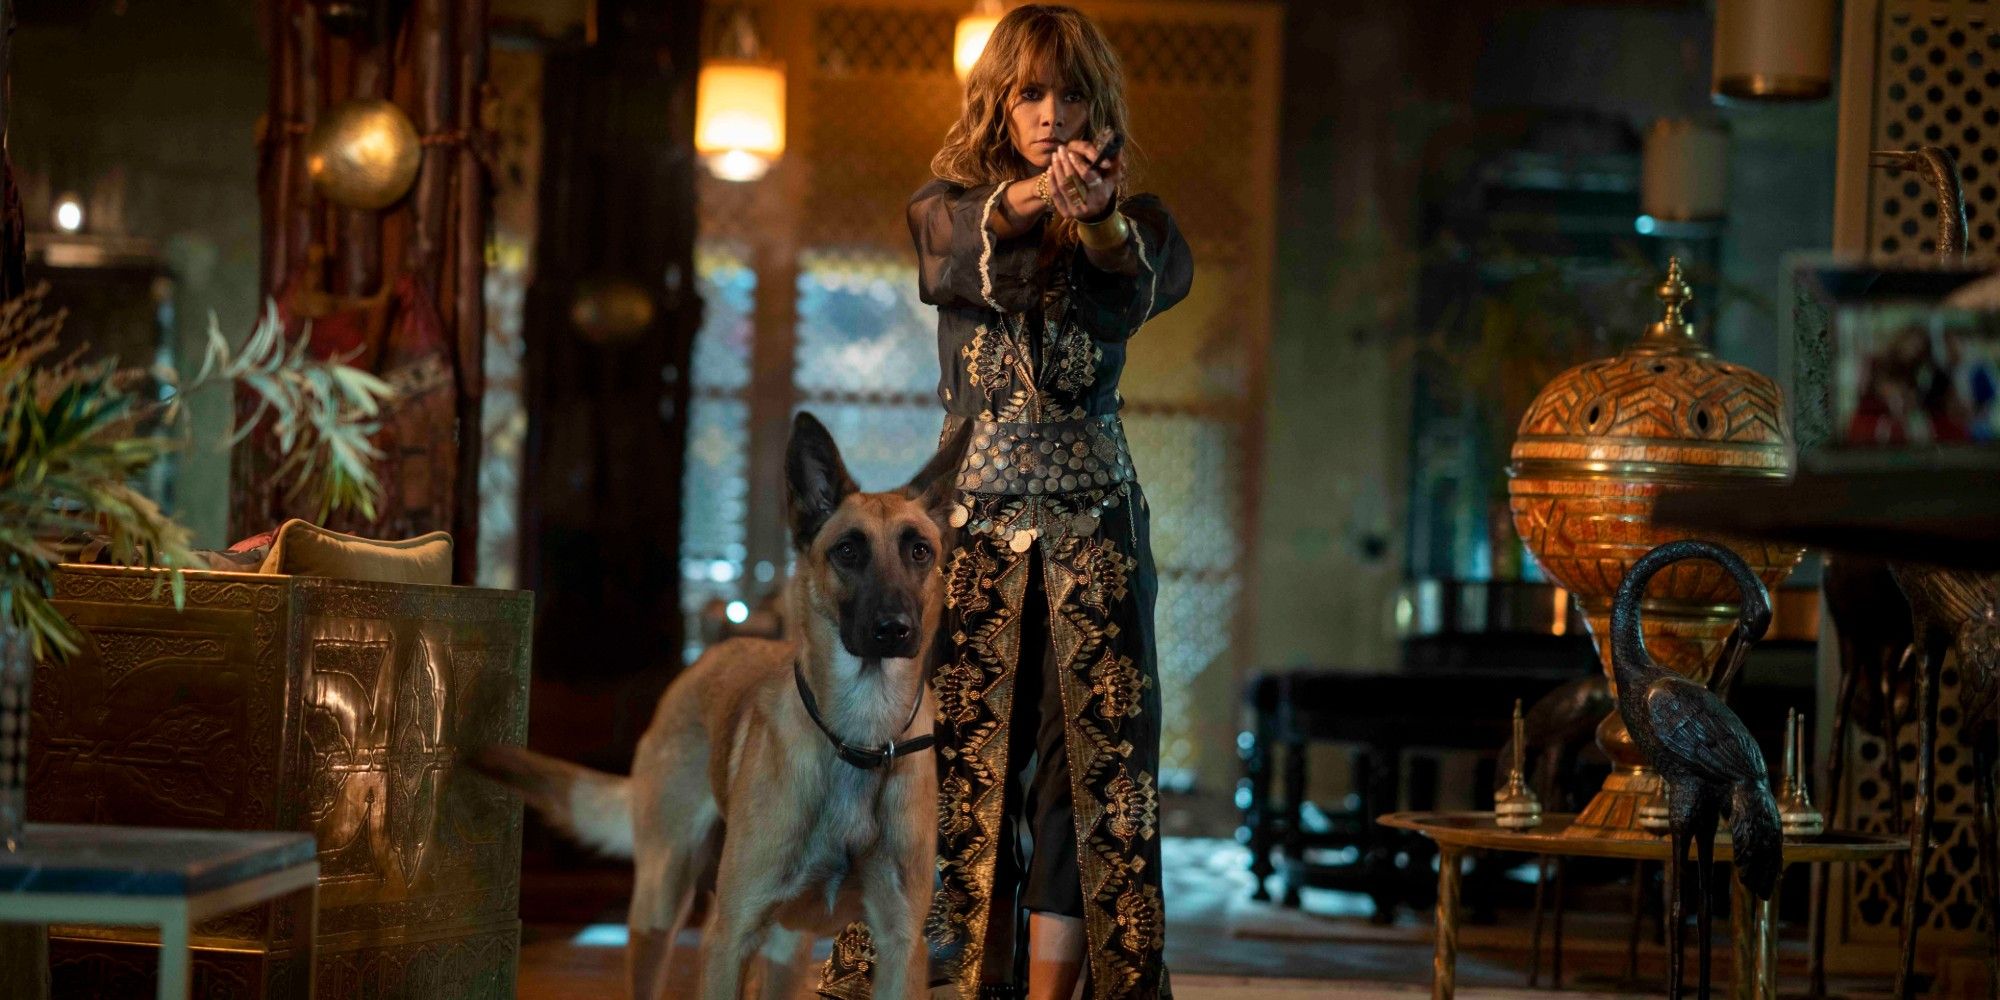 John Wick 3: Halle Berry’s Dog Assassins Kept Ruining Takes by Chasing Cats